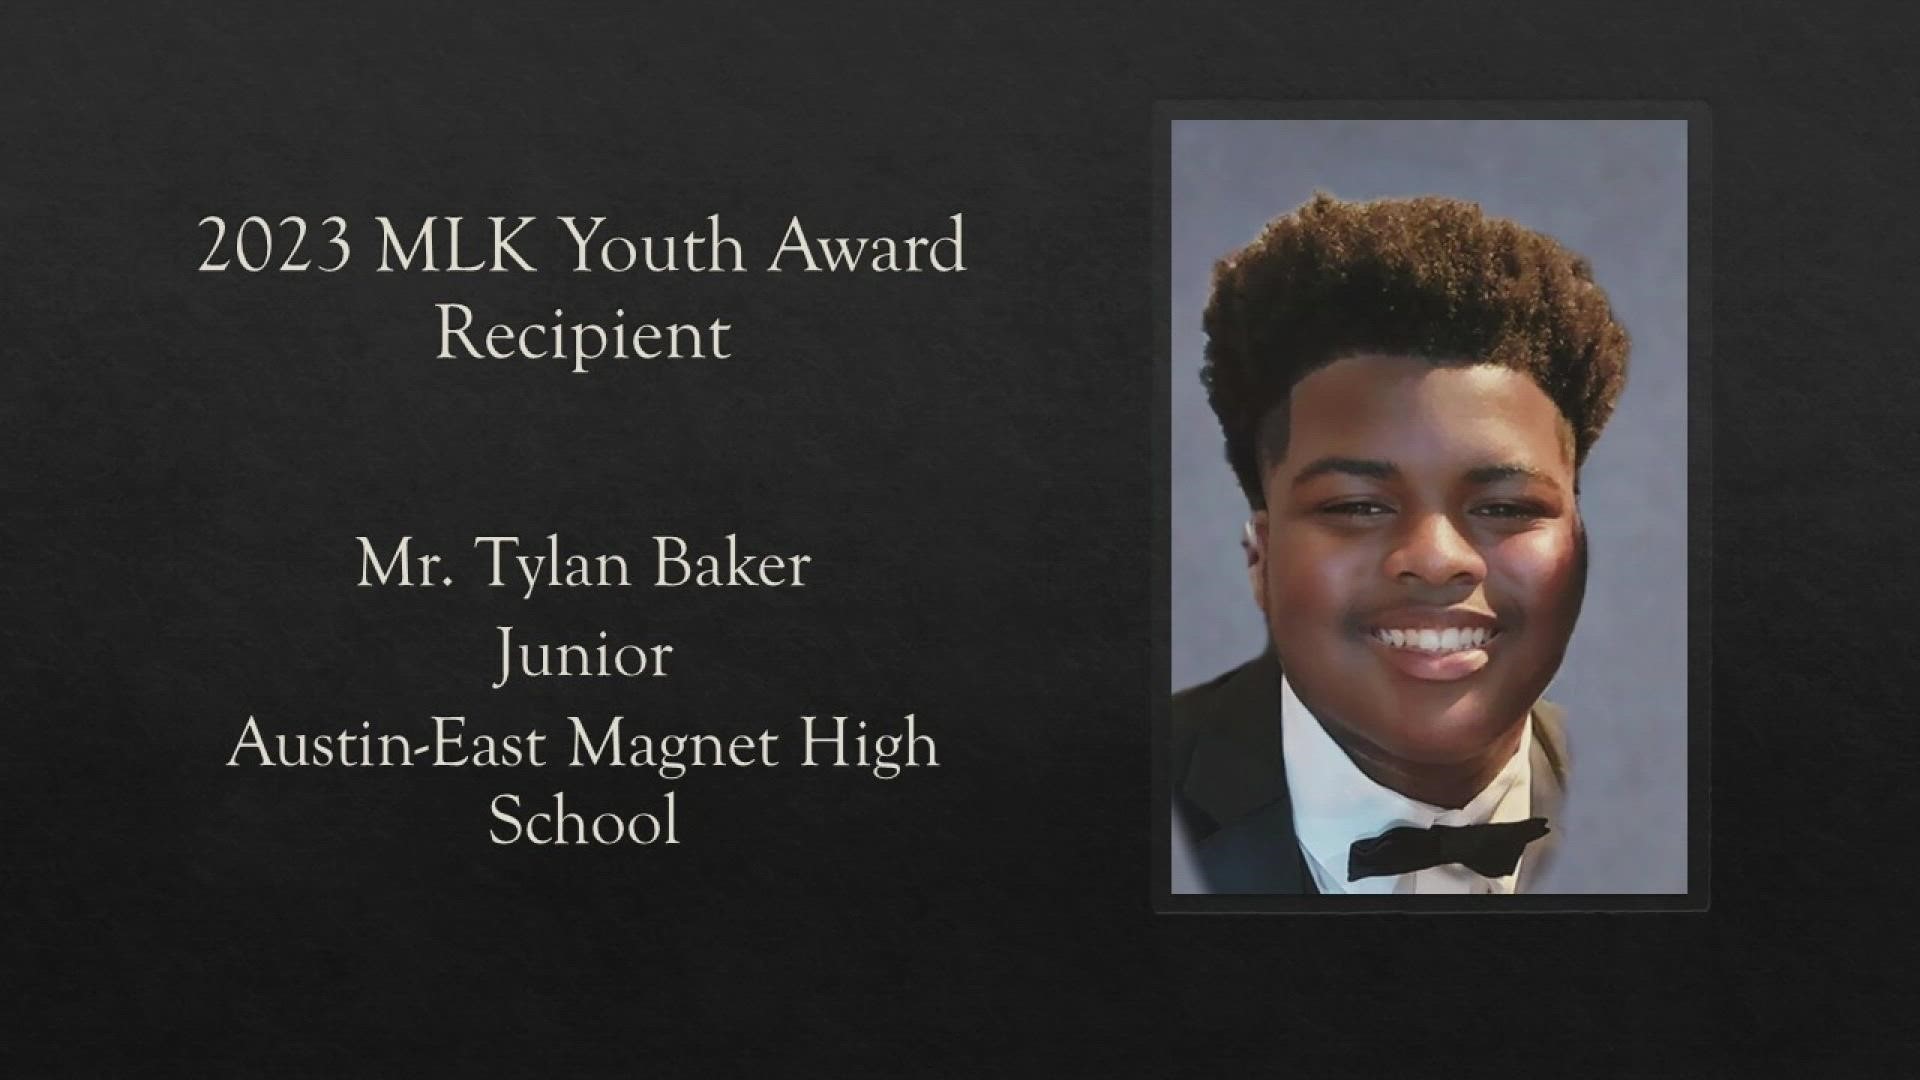 On January 16, 2023 the Martin Luther King, Jr. Commemorative Commission will honor Tylan Baker, 17, with their inaugural 'Youth Award'.  Jan 12, 2023-4pm